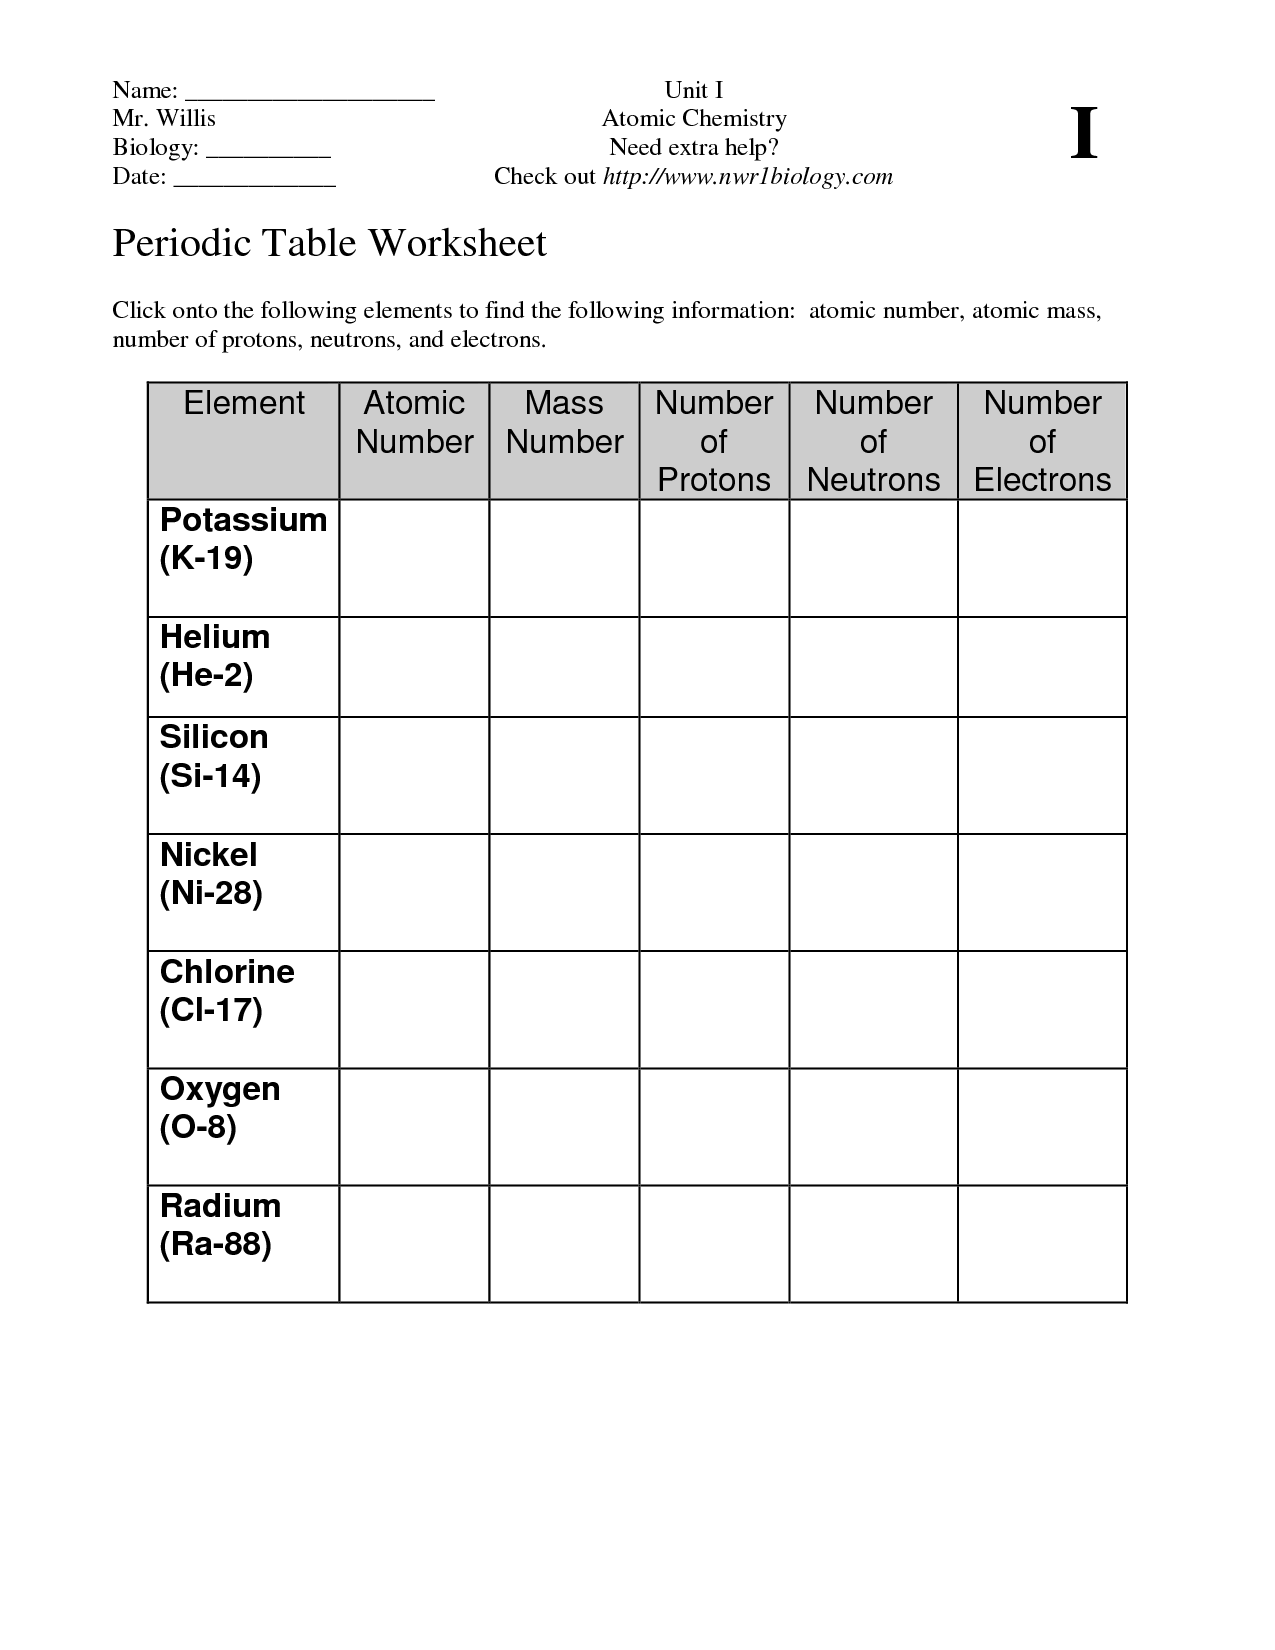 Periodic Table Worksheets Image